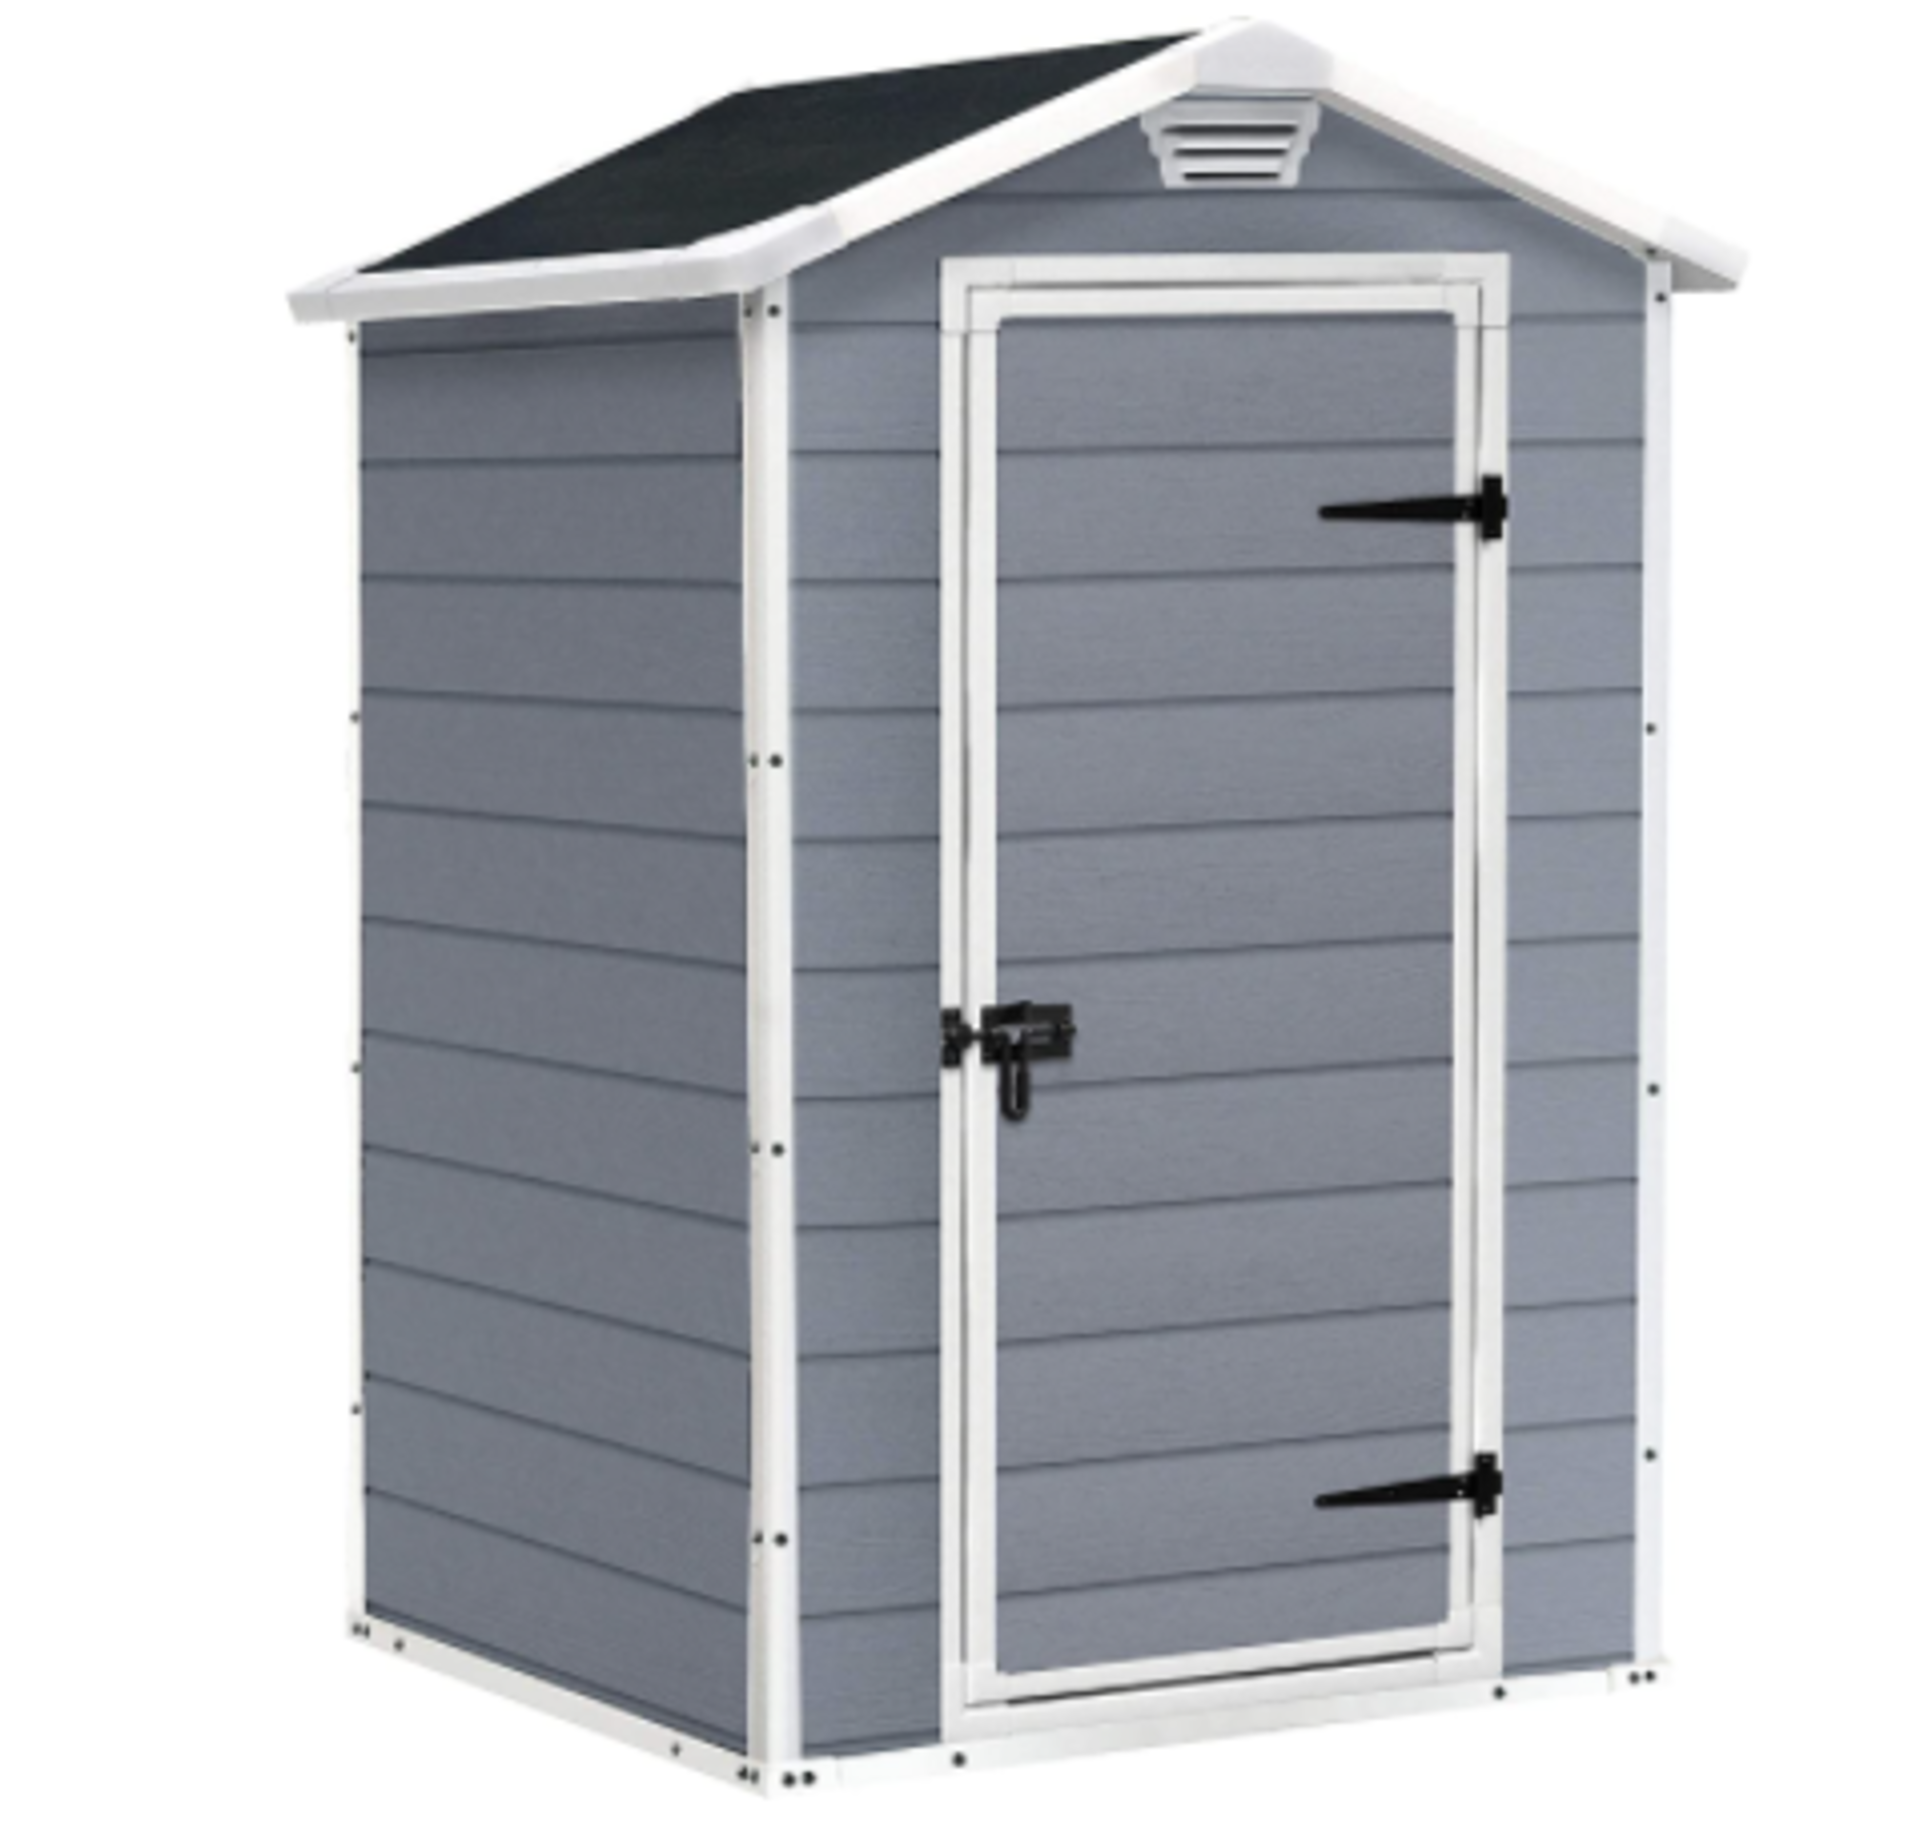 1x Keter Manor Outdoor Plastic Garden Storage Shed 4x3 Grey RRP £319.95. Dimensions (L103x W129x D - Image 2 of 6